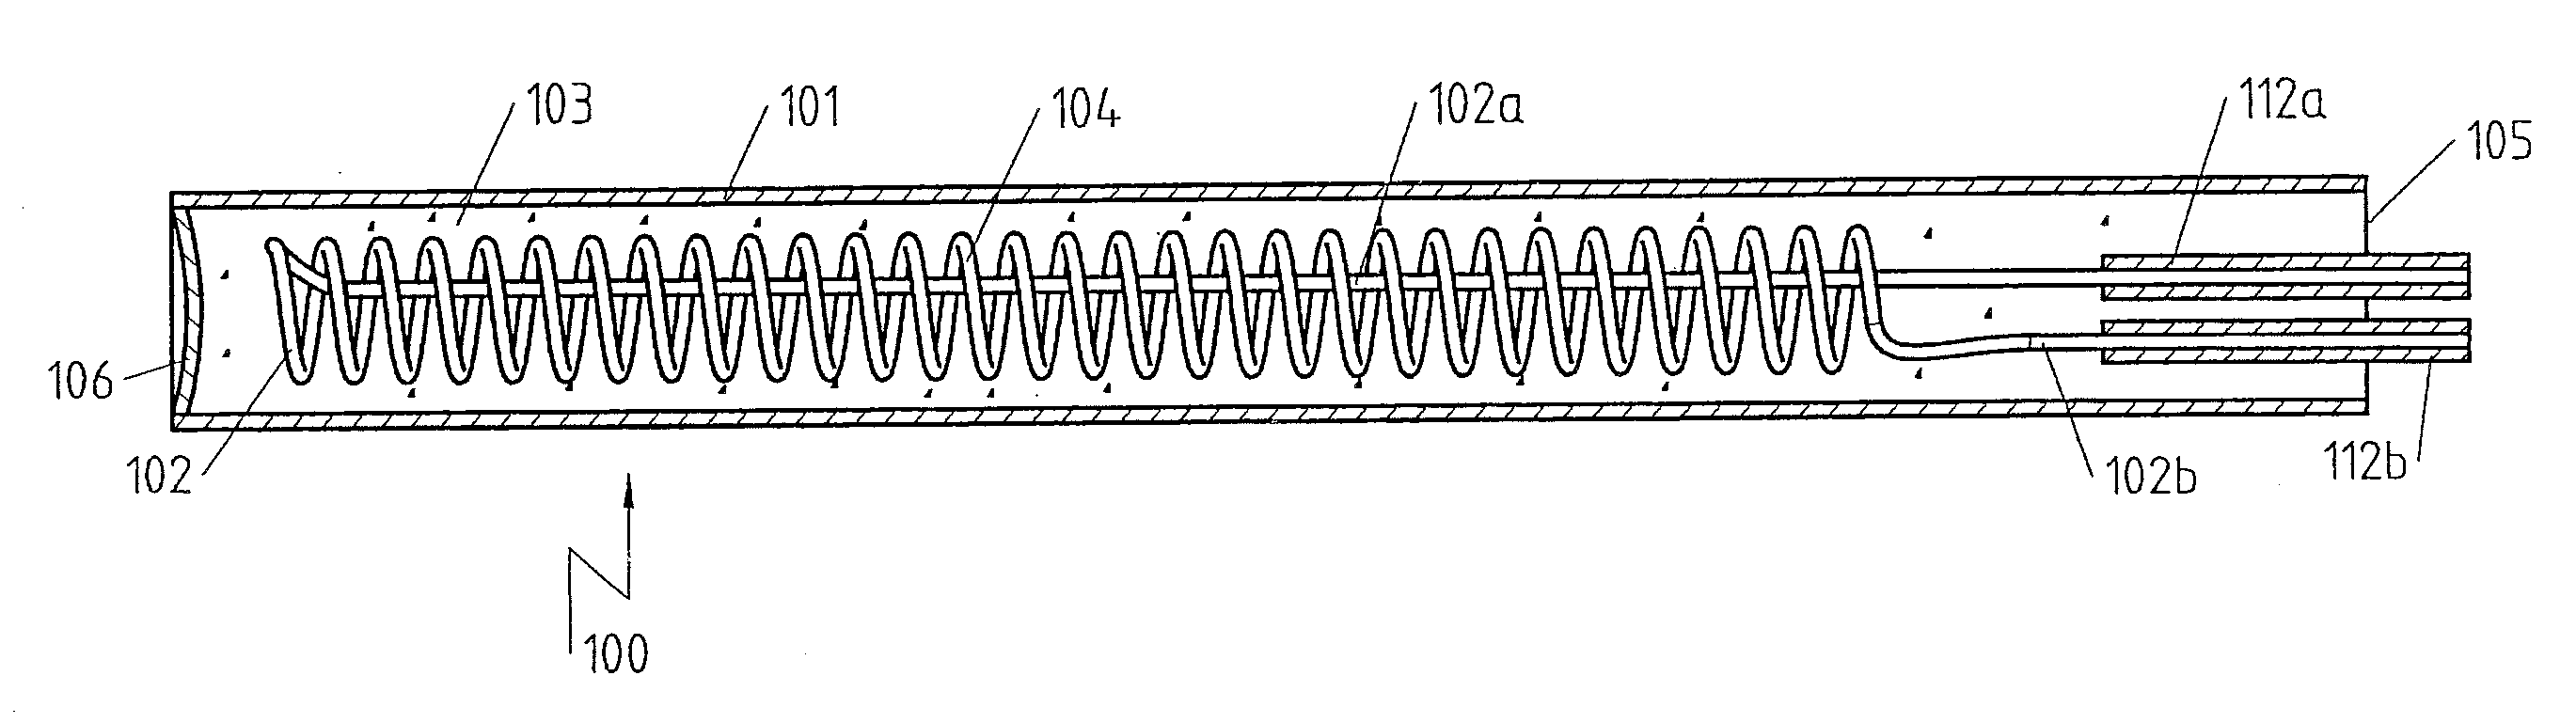 Electric cartridge type heater and method for manufacturing same